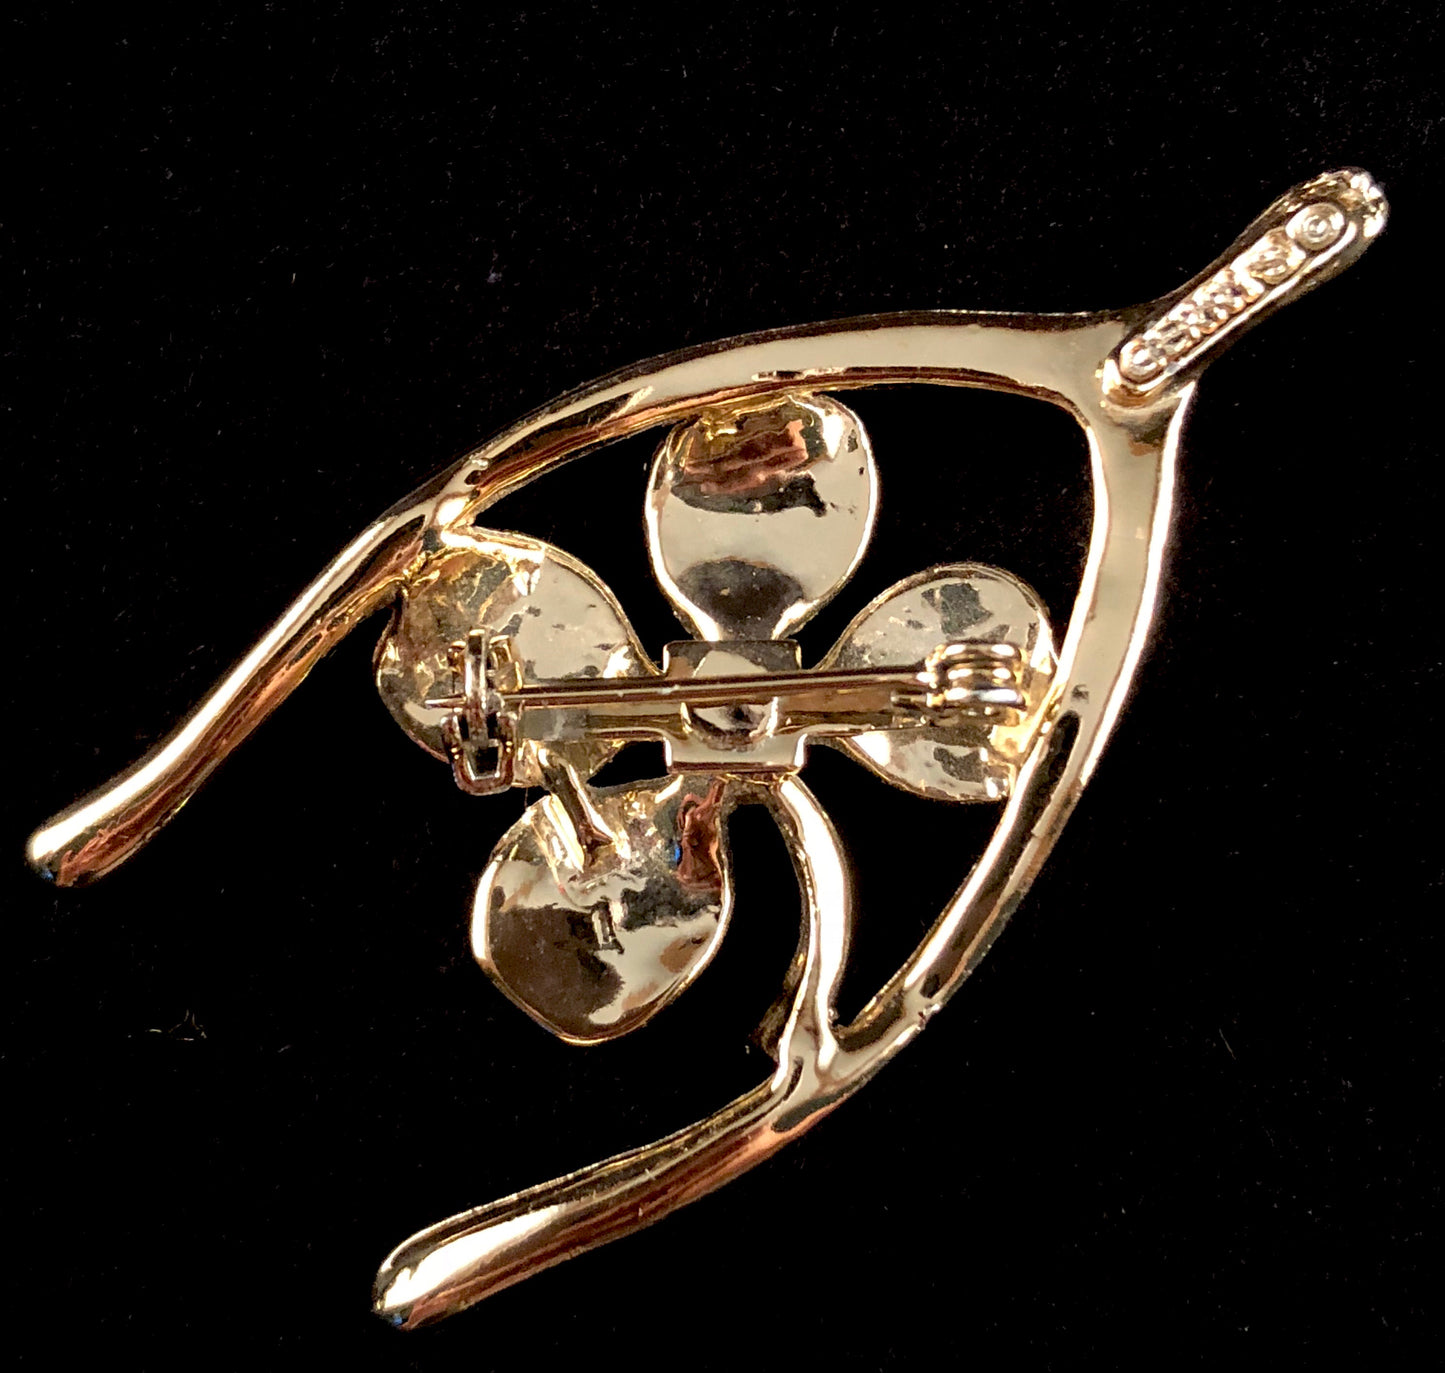 Late 70s/ Early 80s Gerry’s Lucky Wishbone Brooch - Retro Kandy Vintage